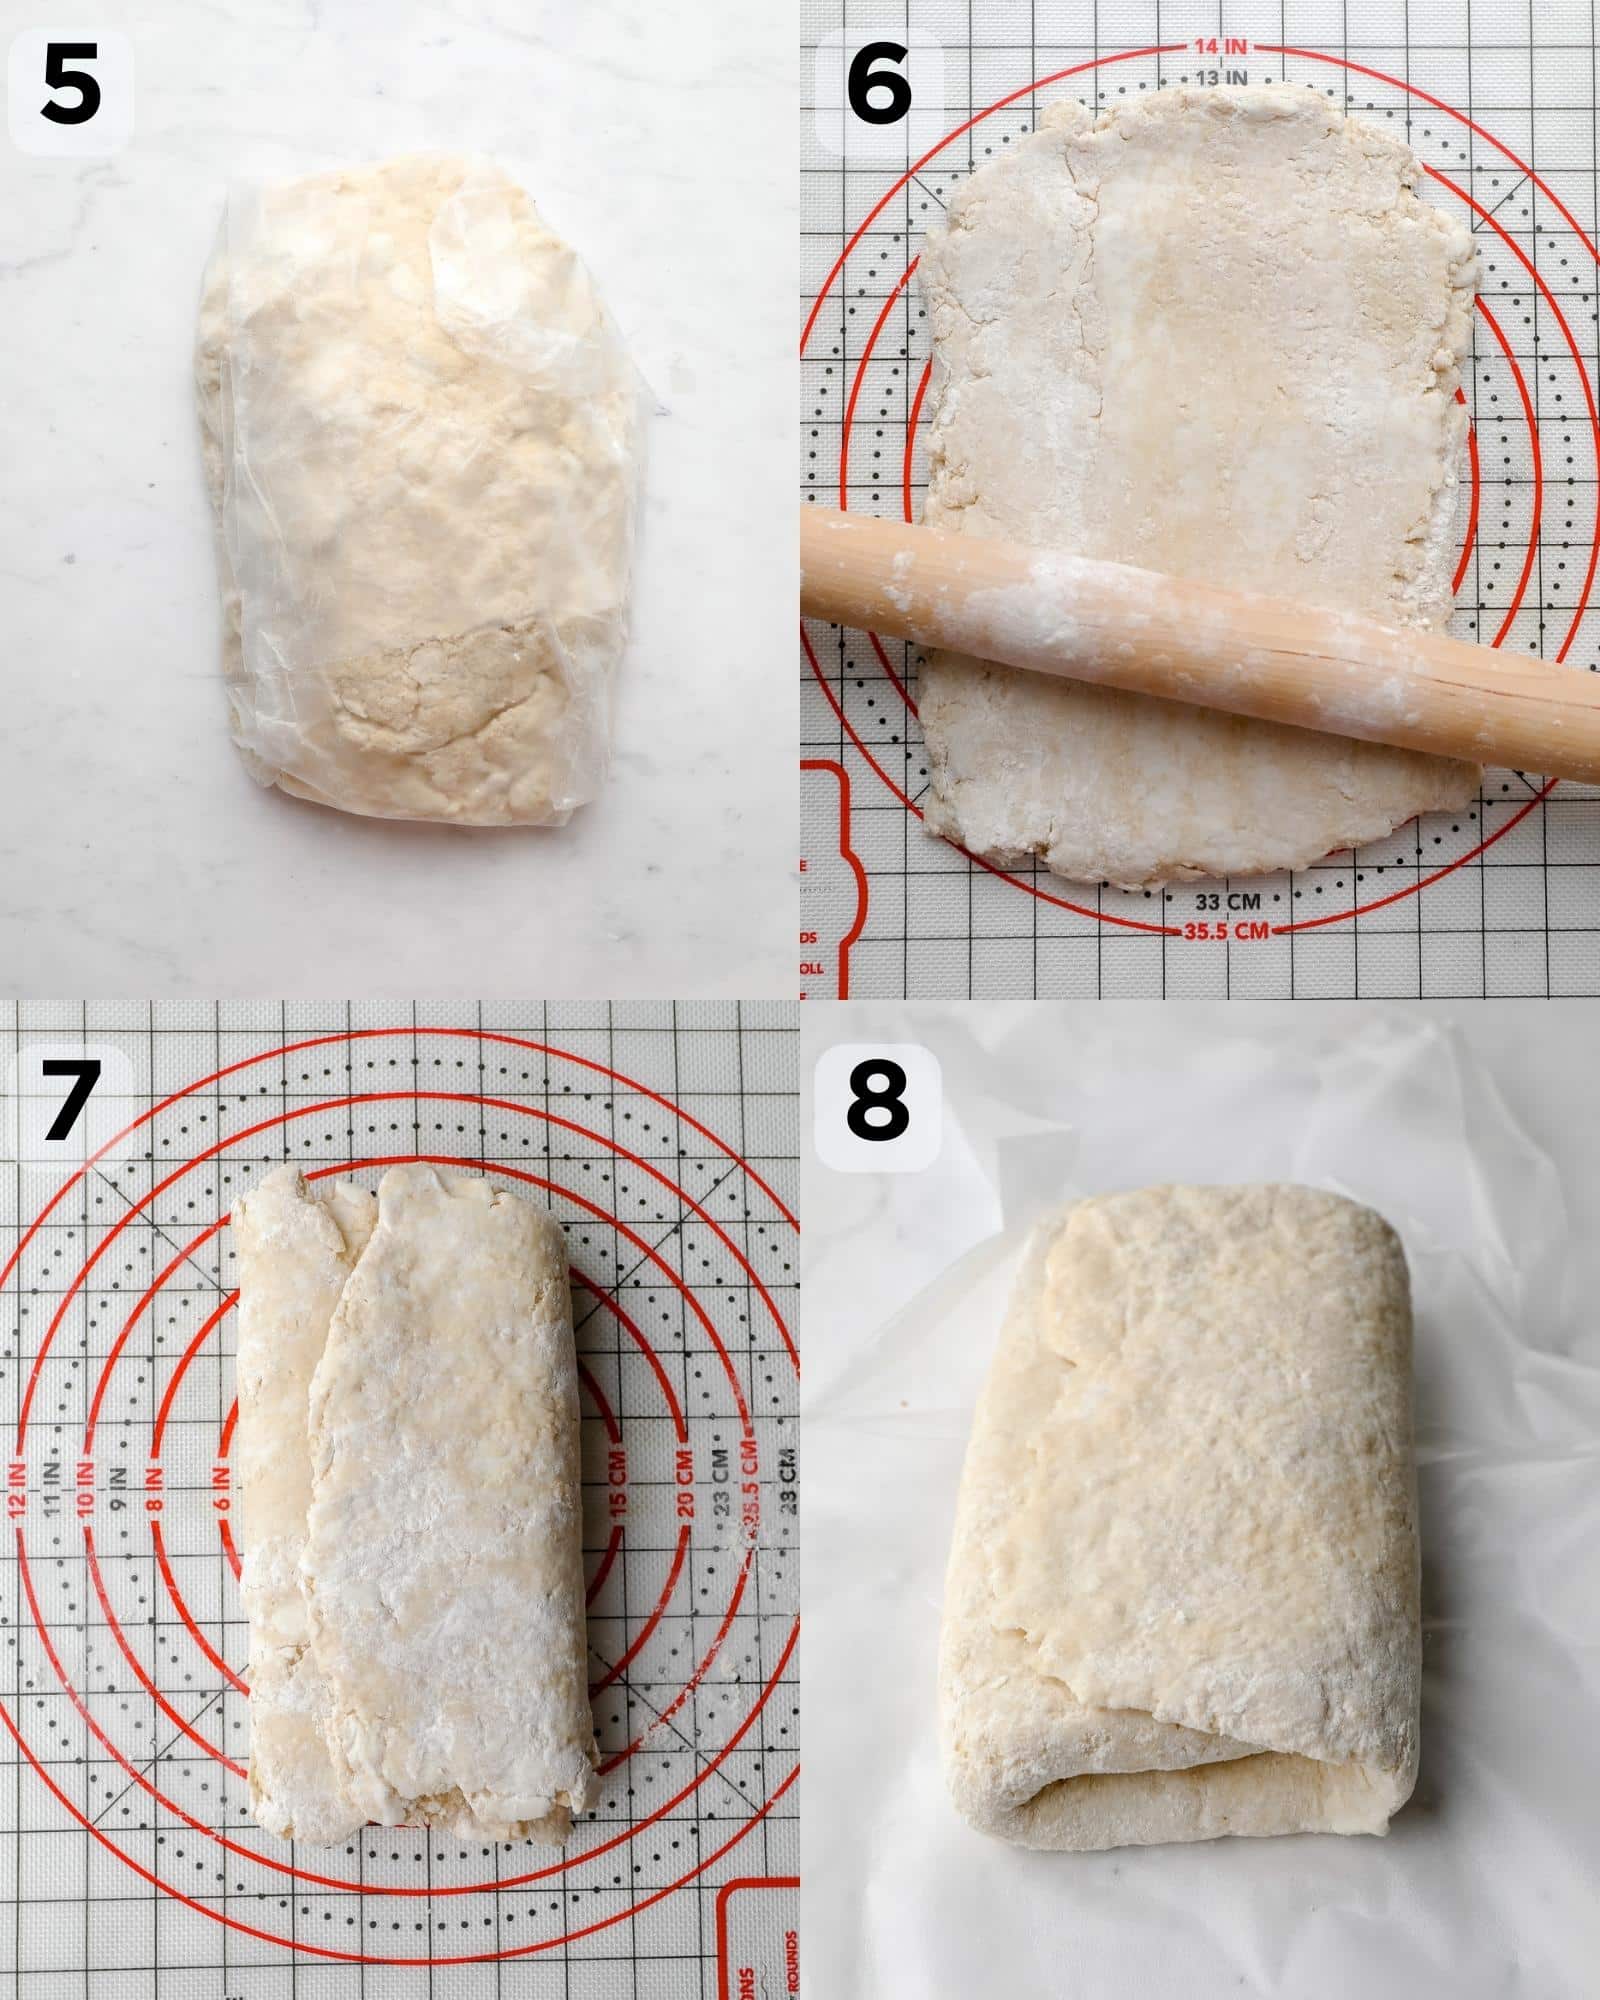 4 images showing the steps to rolling and folding vegan croissant dough.